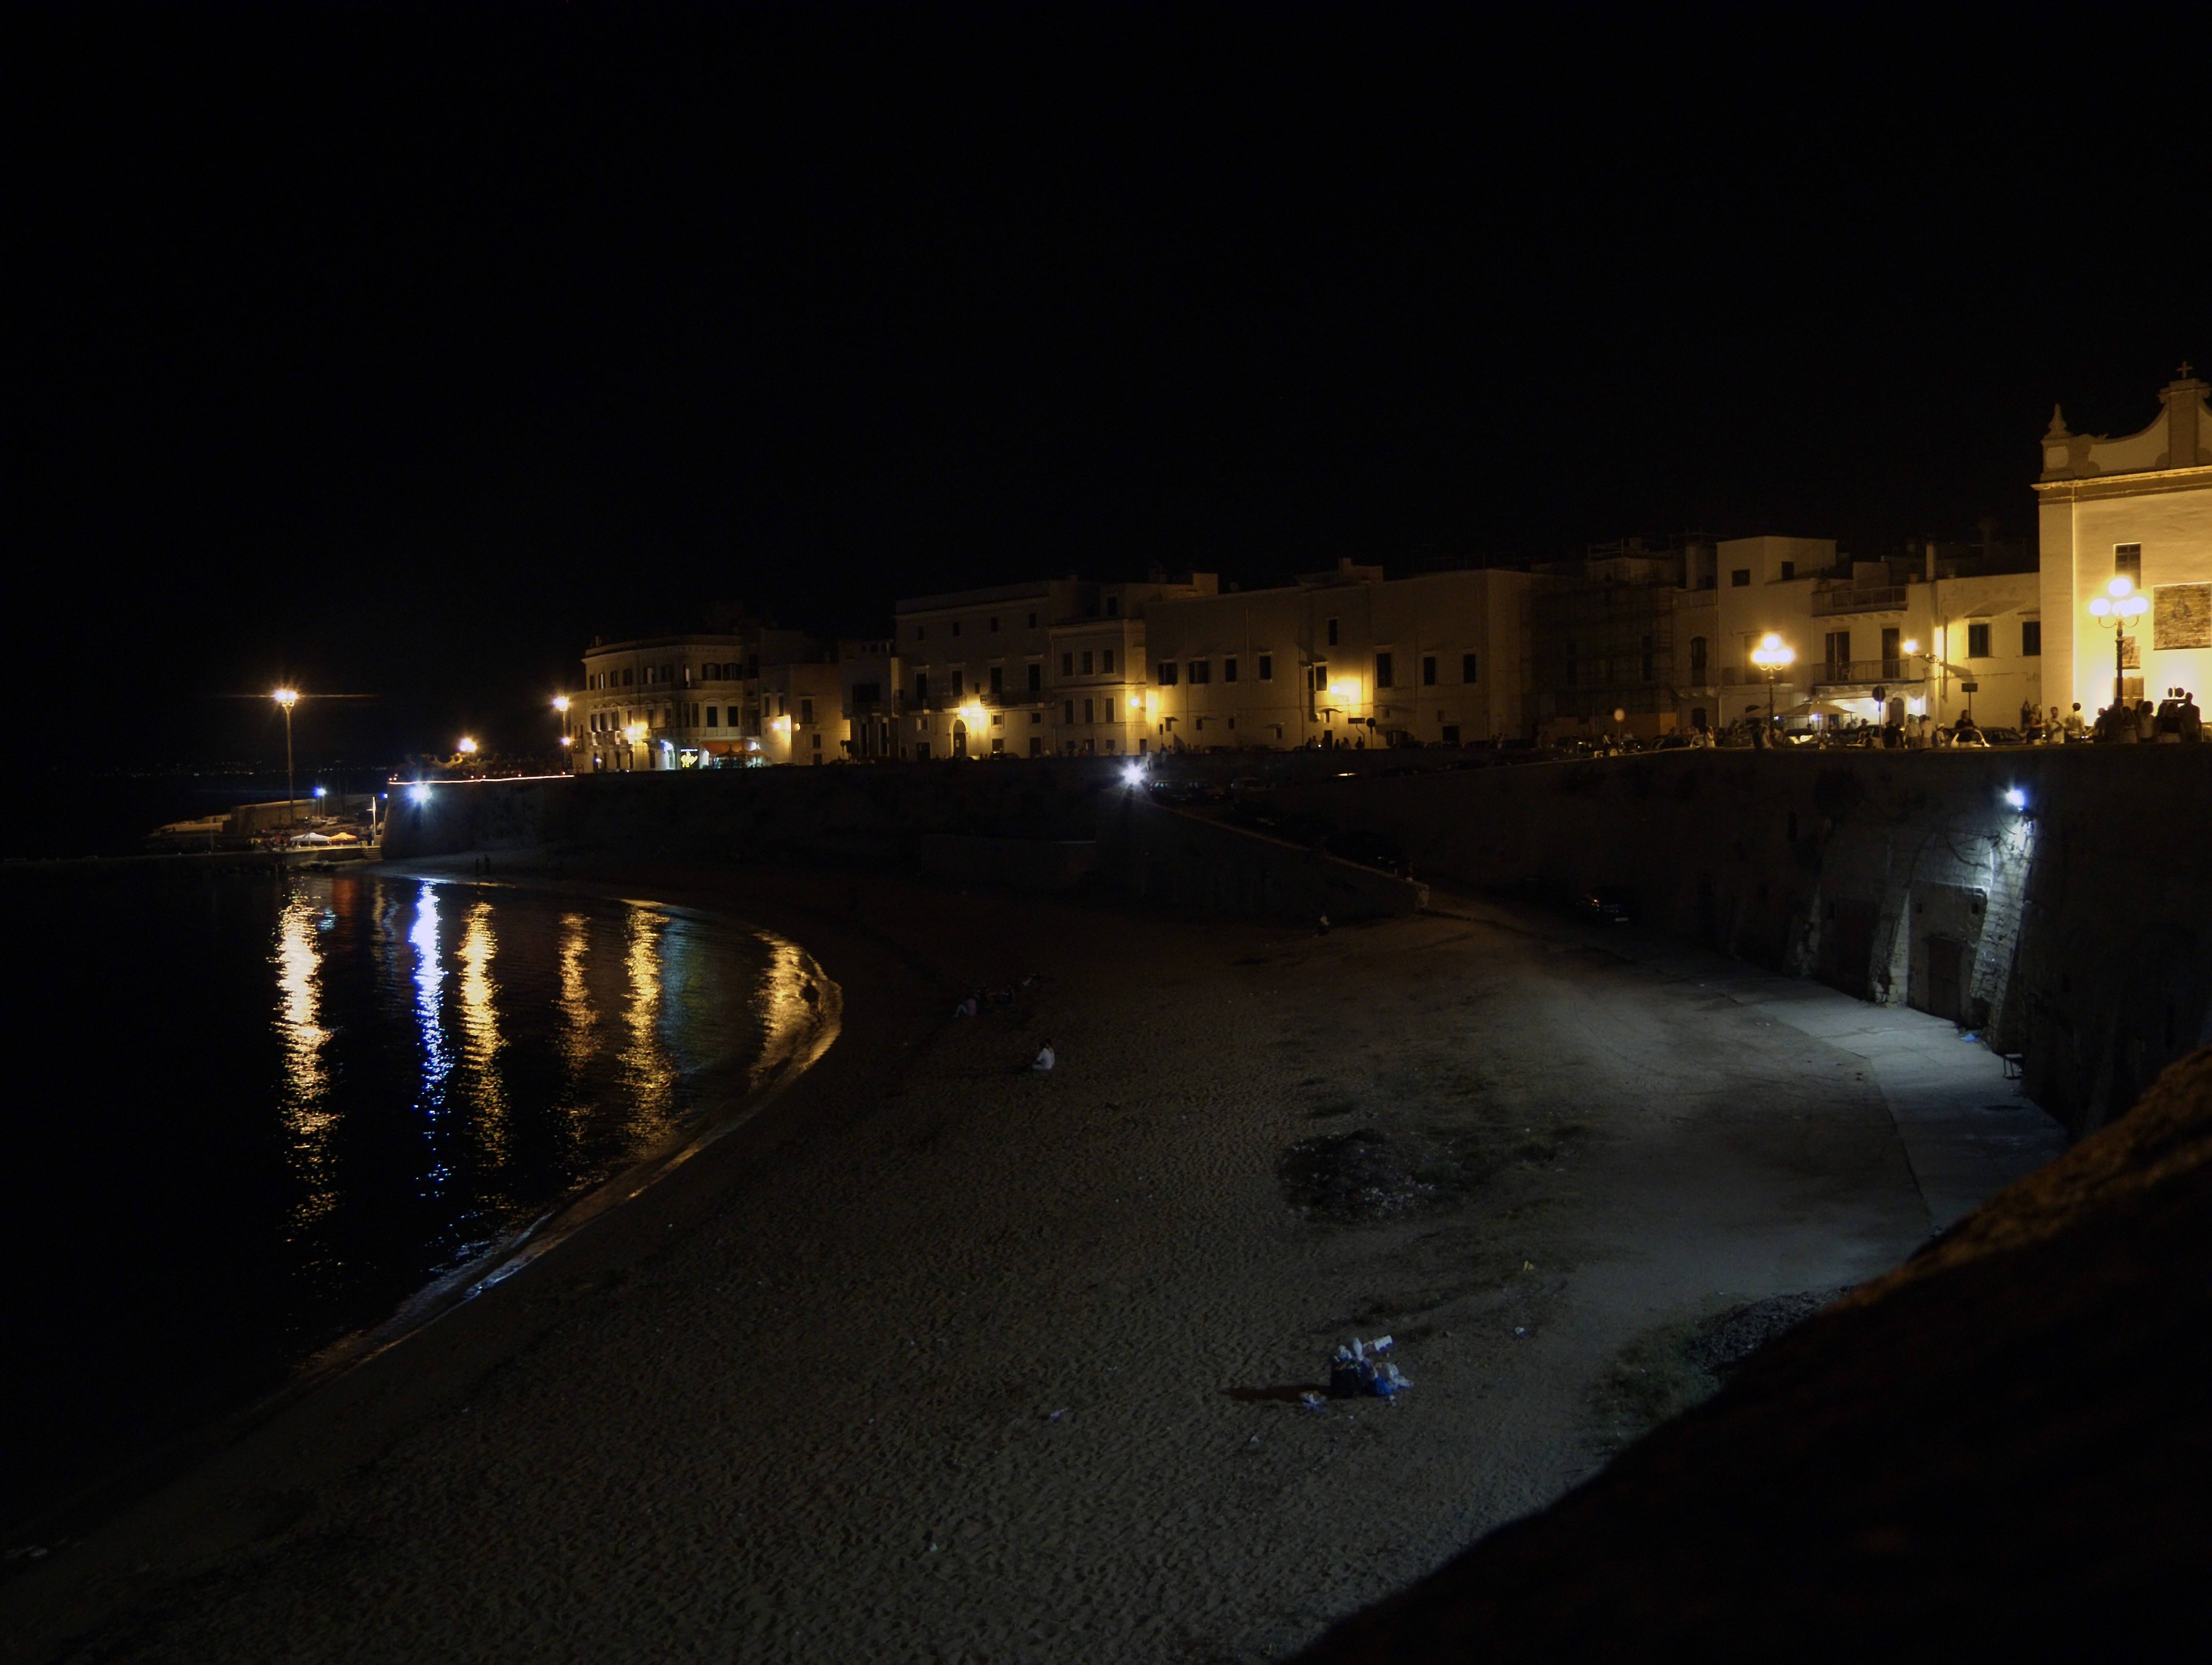 Gallipoli (Lecce, Italy): The beach of the Gallipoli Old by night - Gallipoli (Lecce, Italy)